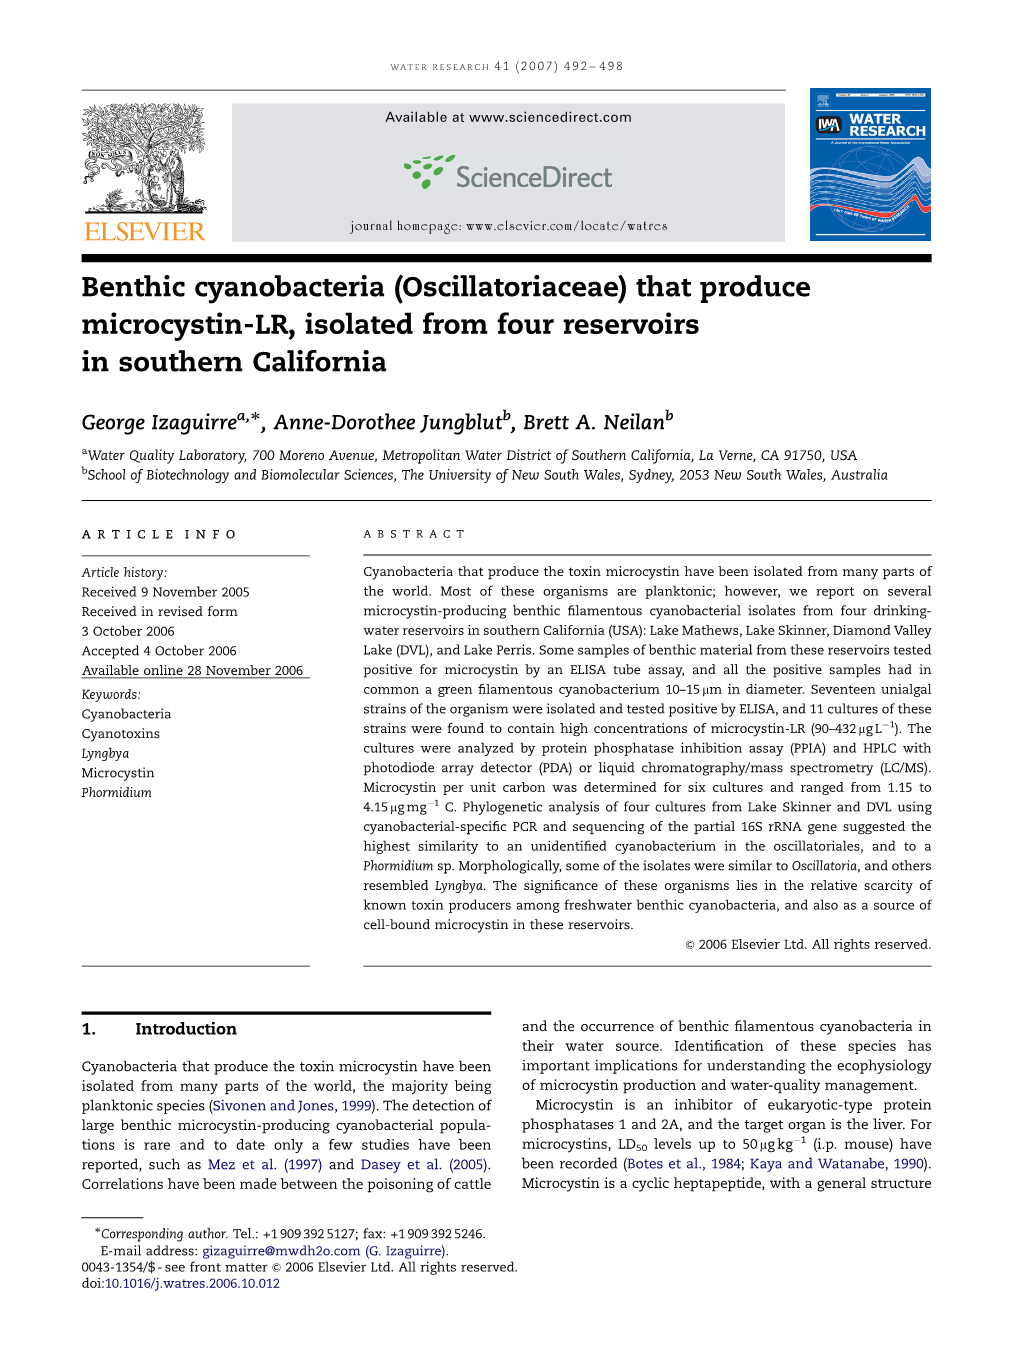 Benthic Cyanobacteria (Oscillatoriaceae) That Produce Microcystin-LR, Isolated from Four Reservoirs in Southern California